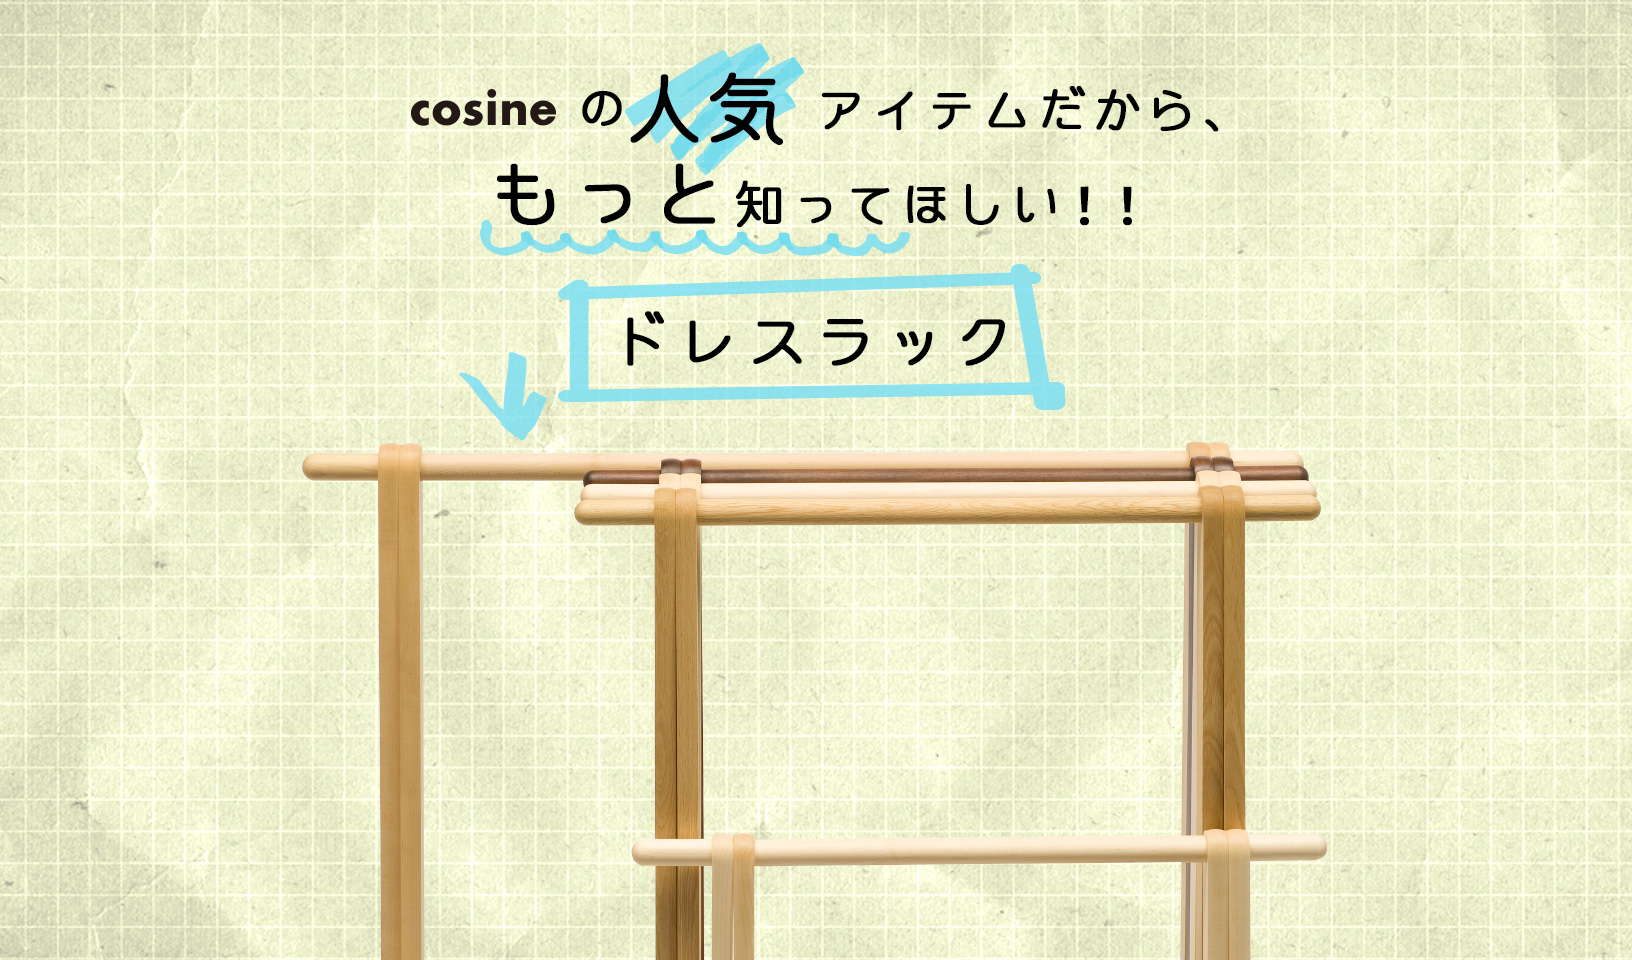 Dress rack - cosine's popular item, so I want you to know more!